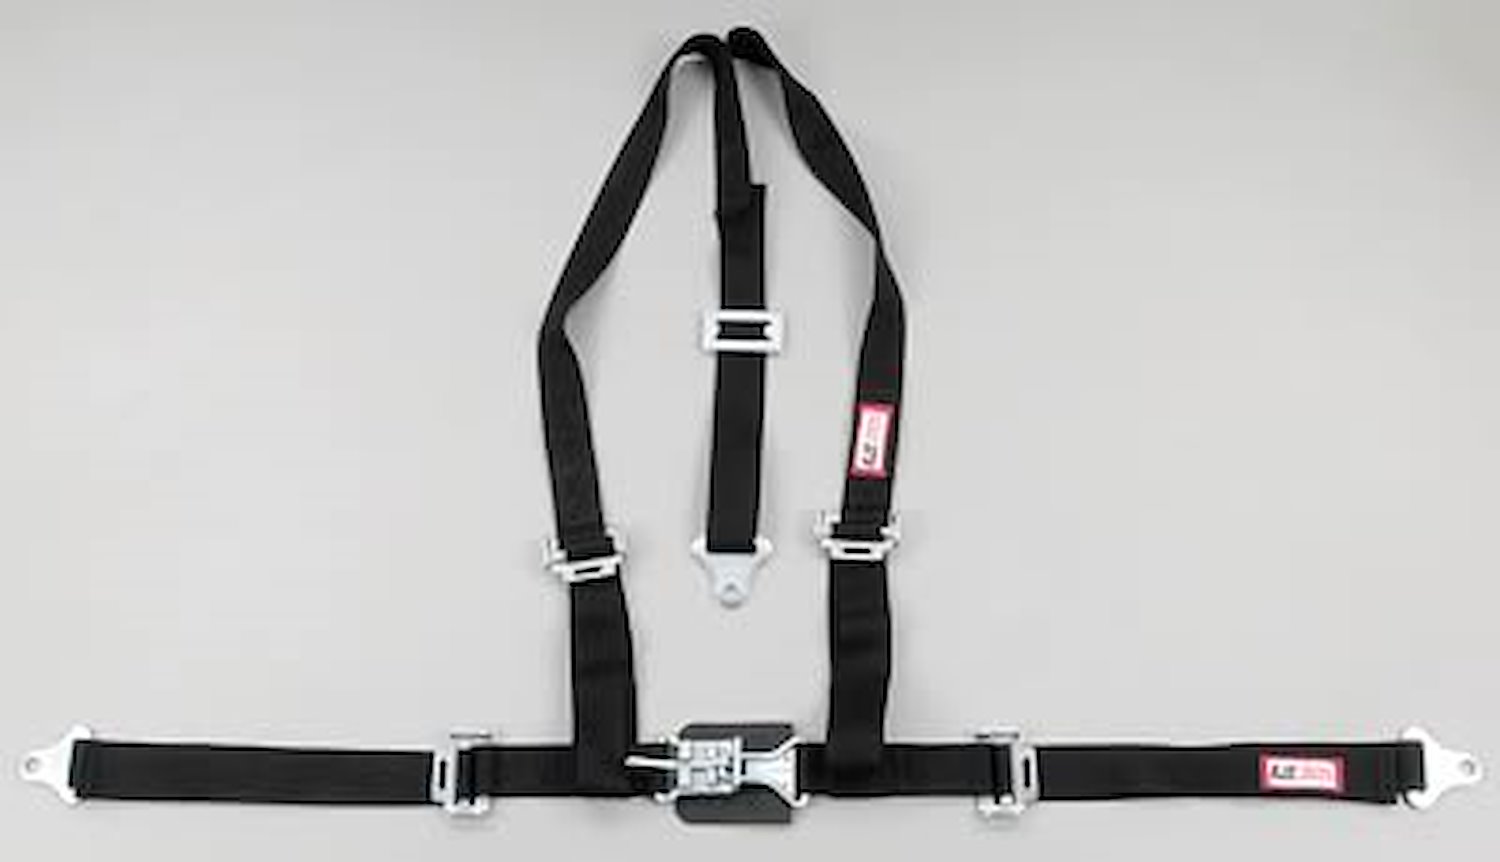 NON-SFI L&L HARNESS 2 PULL DOWN Lap Belt SNAP SEWN IN 2 S.H. Y FLOOR Mount w/STERNUM STRAP WRAP/BOLT GRAY